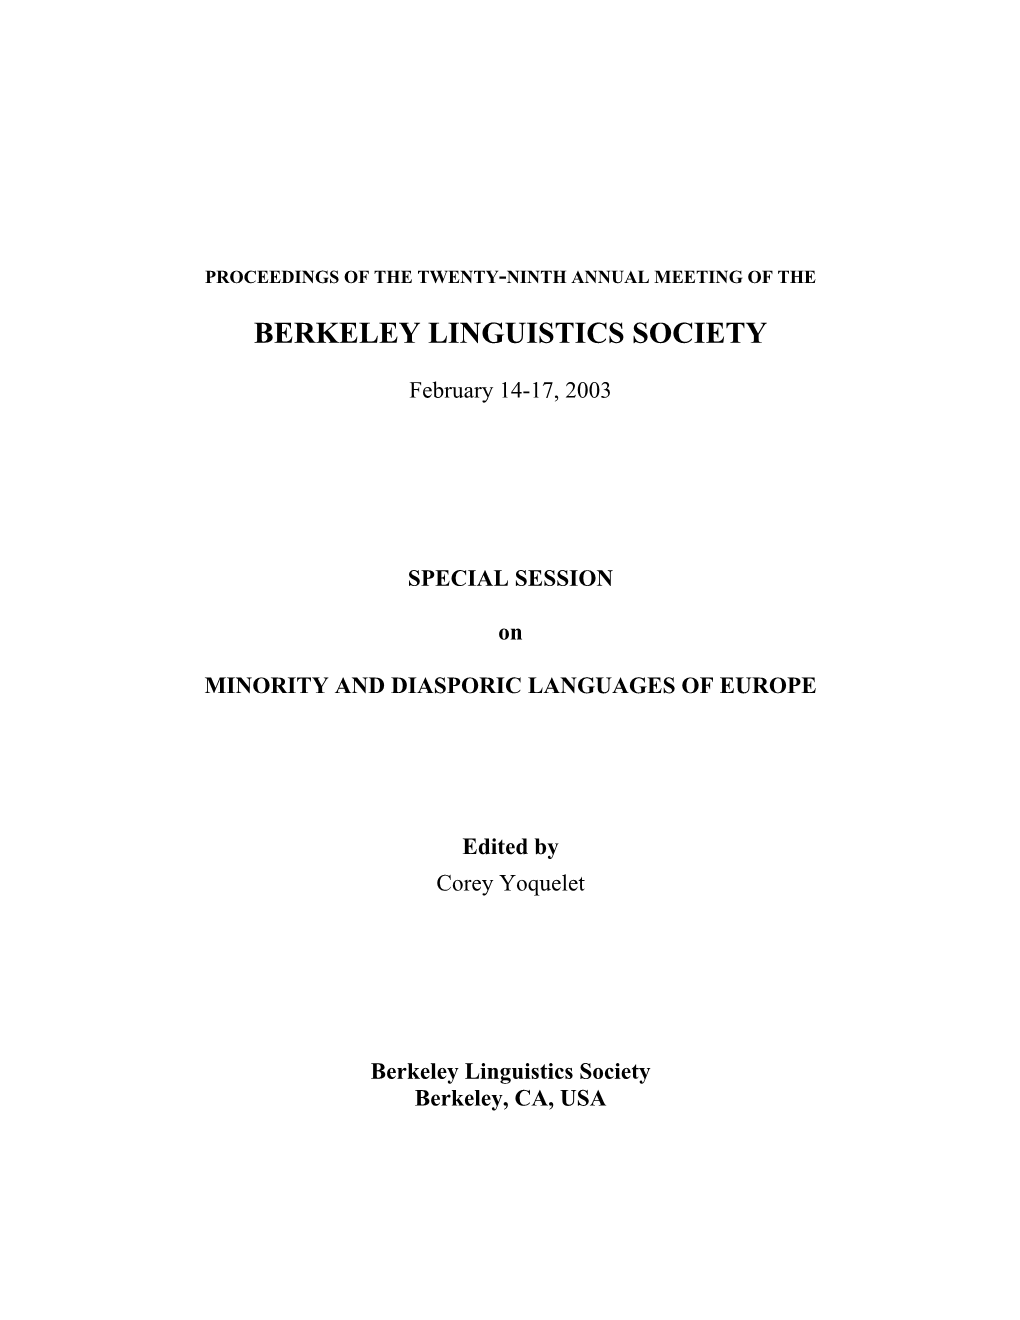 Proceedings of the Twenty-Eighth Annual Meeting of the Berkeley Linguistics Society, February 15-18, 2002; General Session and Parasession on Field Linguistics